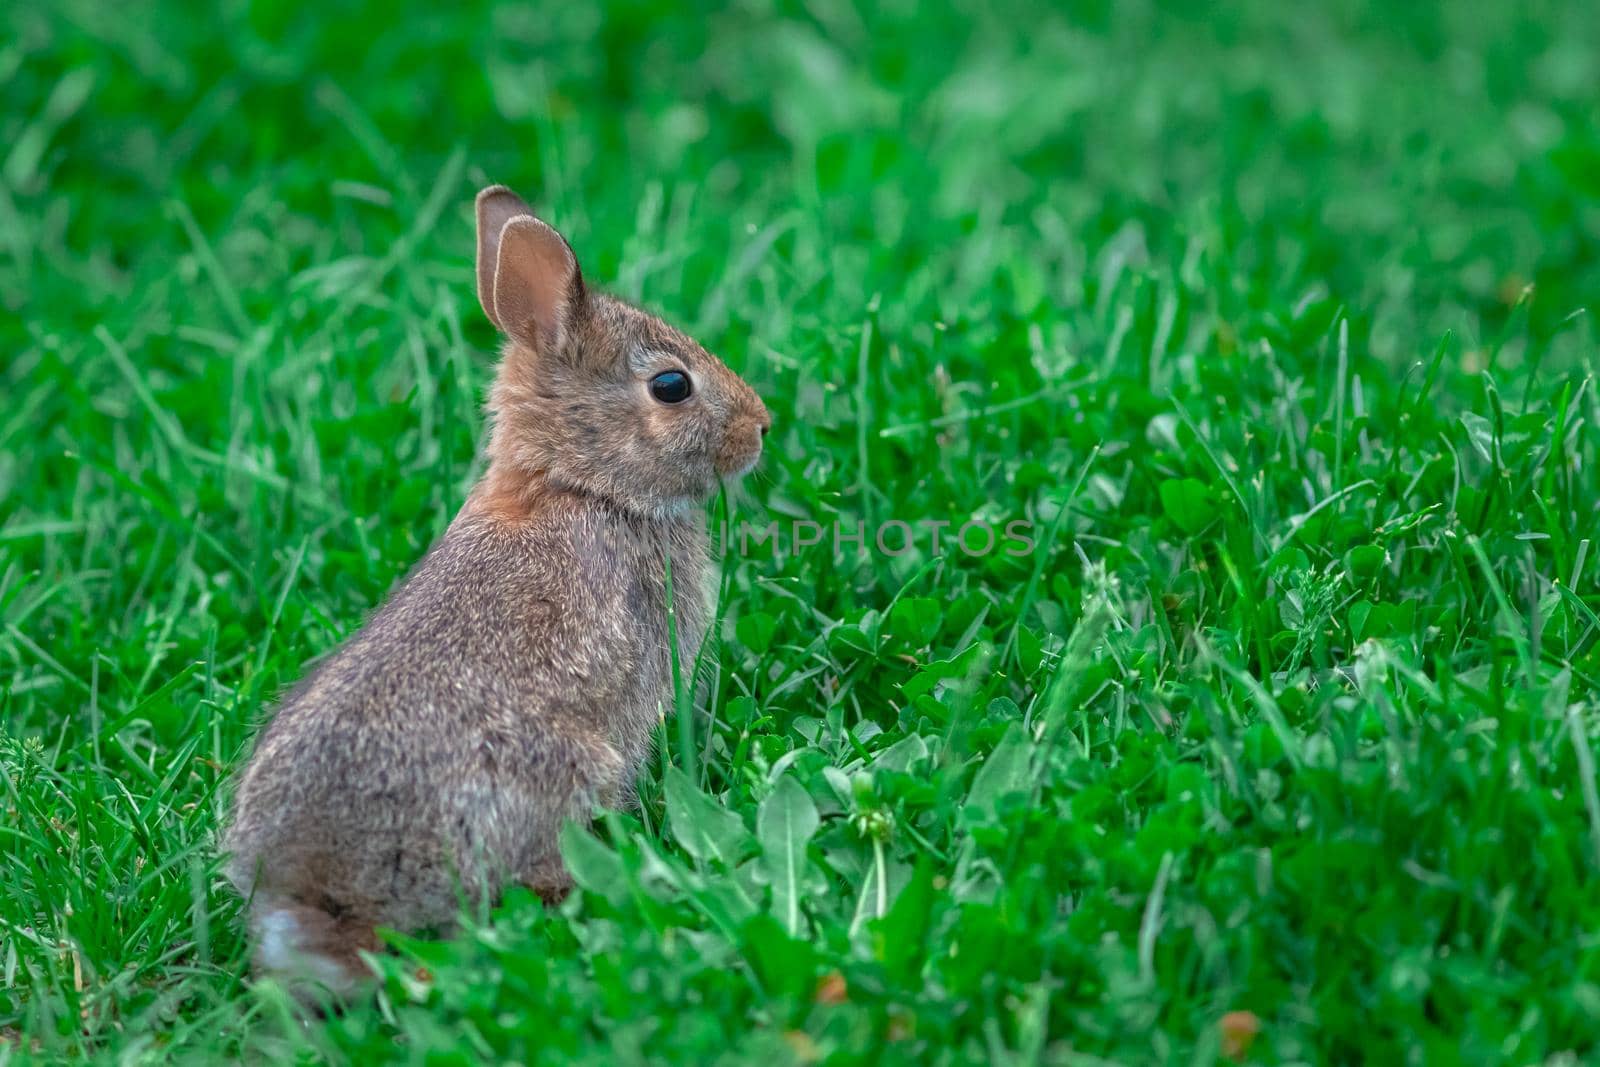 A juvenile eastern cottontail rabbit (Sylvilagus floridanus) is sitting upright and alert in vibrant green grass.